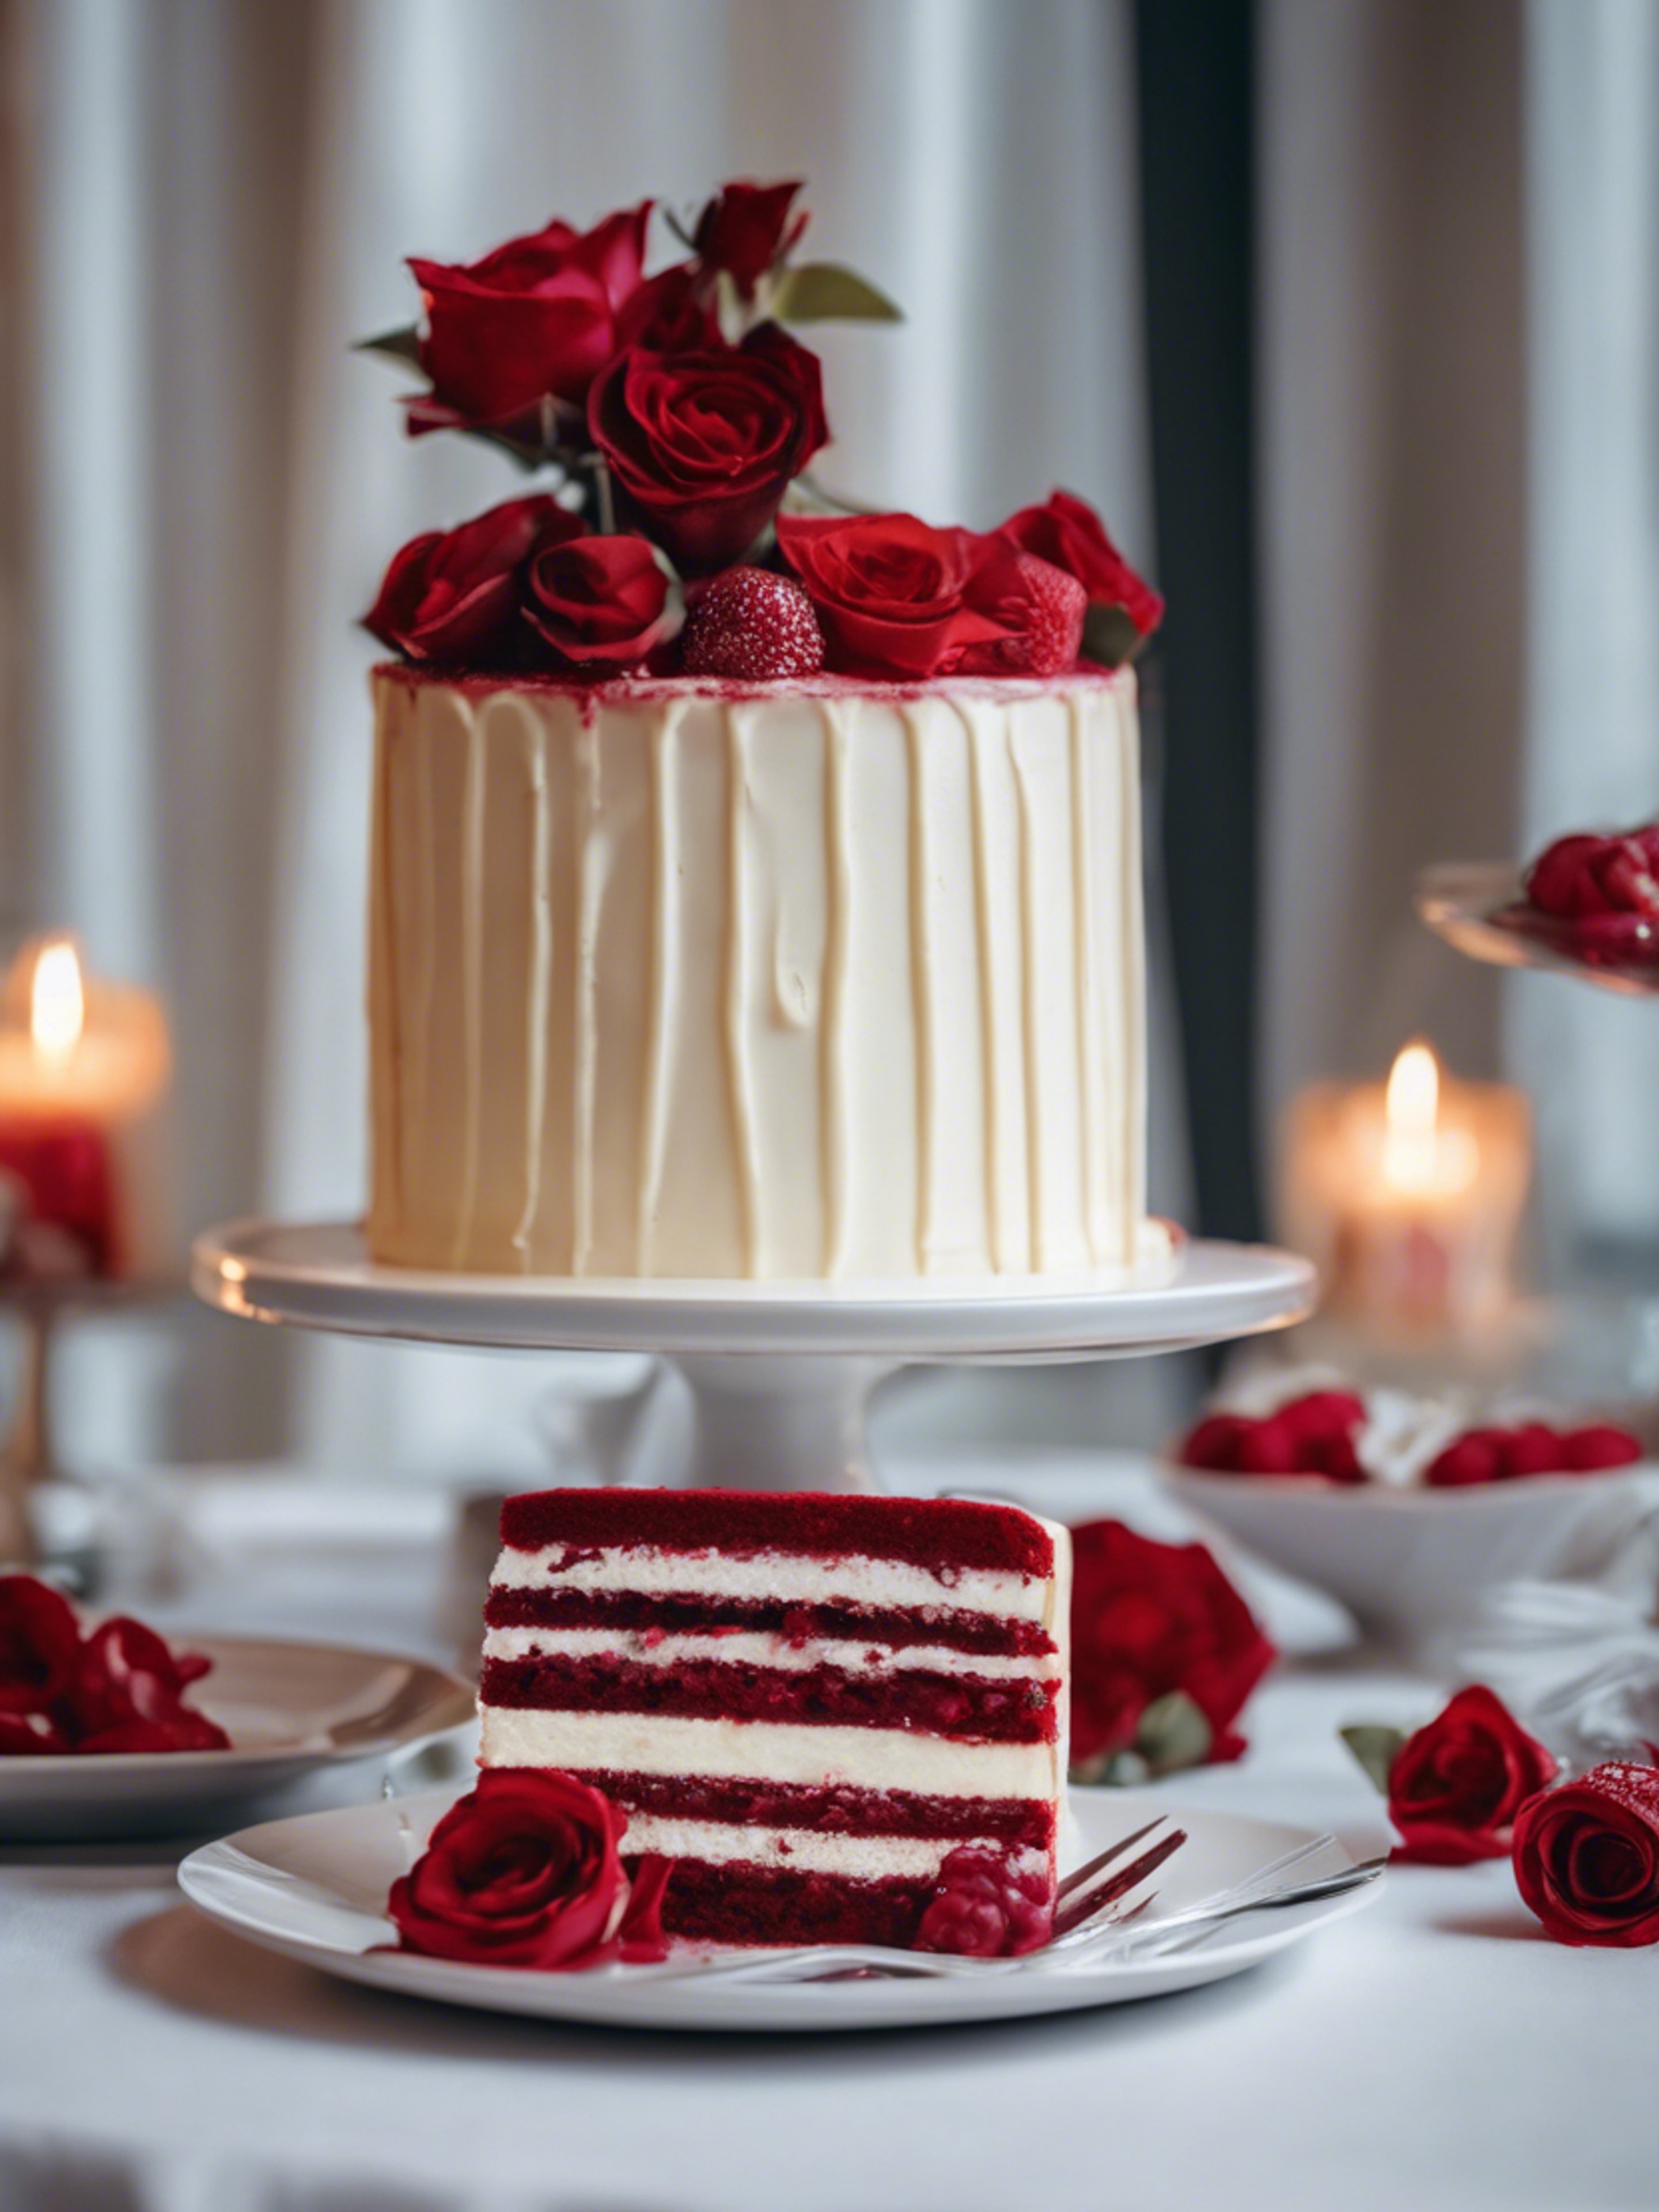 A scrumptious red velvet and white cream layered cake on a dessert table.壁紙[9c378ca78b014f2daafb]